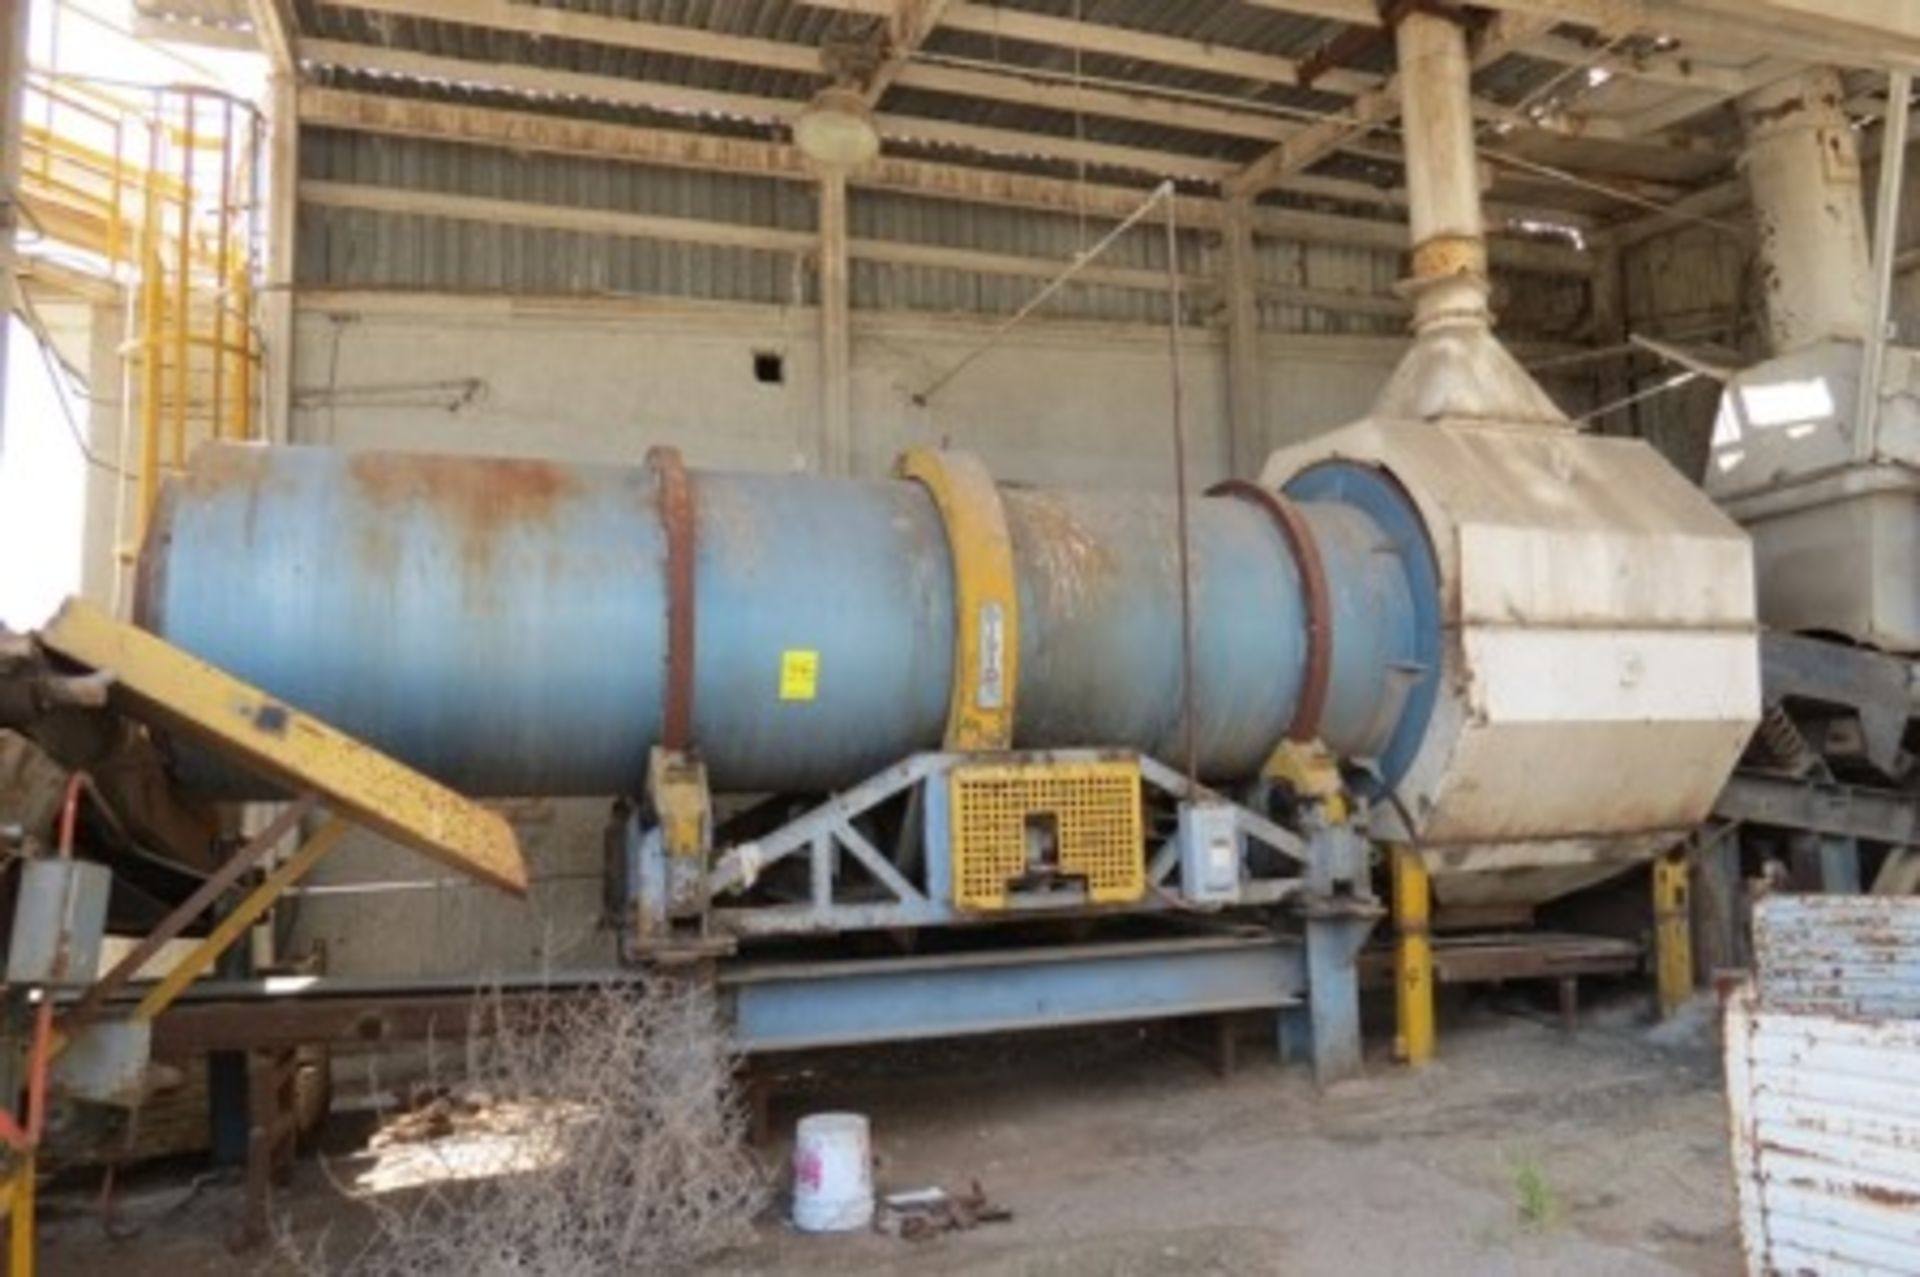 Dust collector, with 2 150 hp centrifugal blowers, filters, ducts, cooling tower - Image 31 of 46